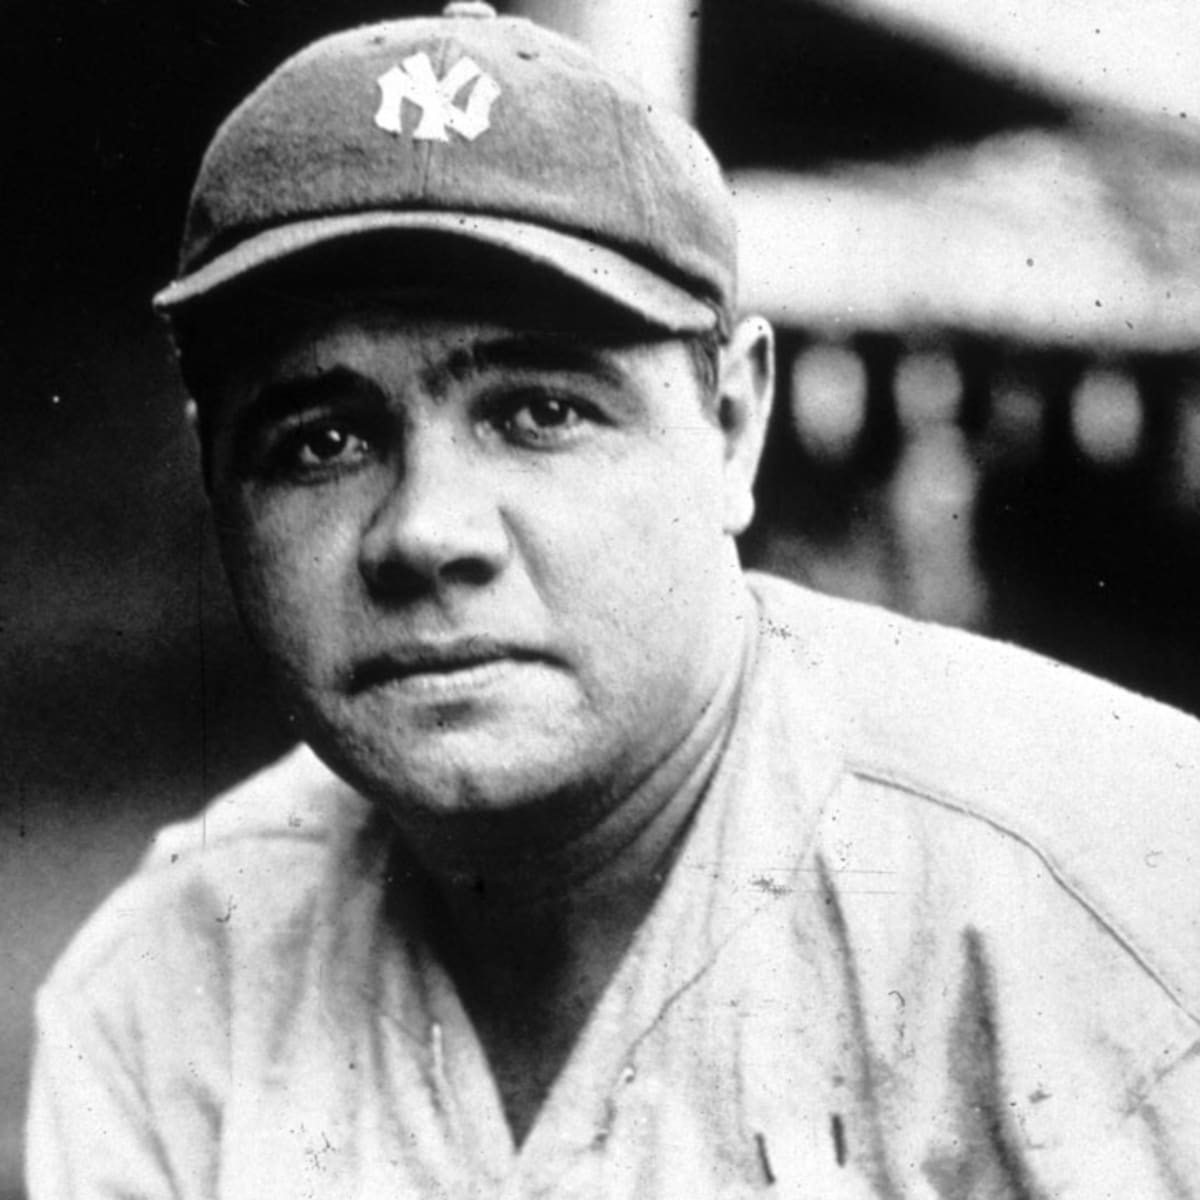 Babe Ruth game-used jersey sells for $4.4 million - Beckett News